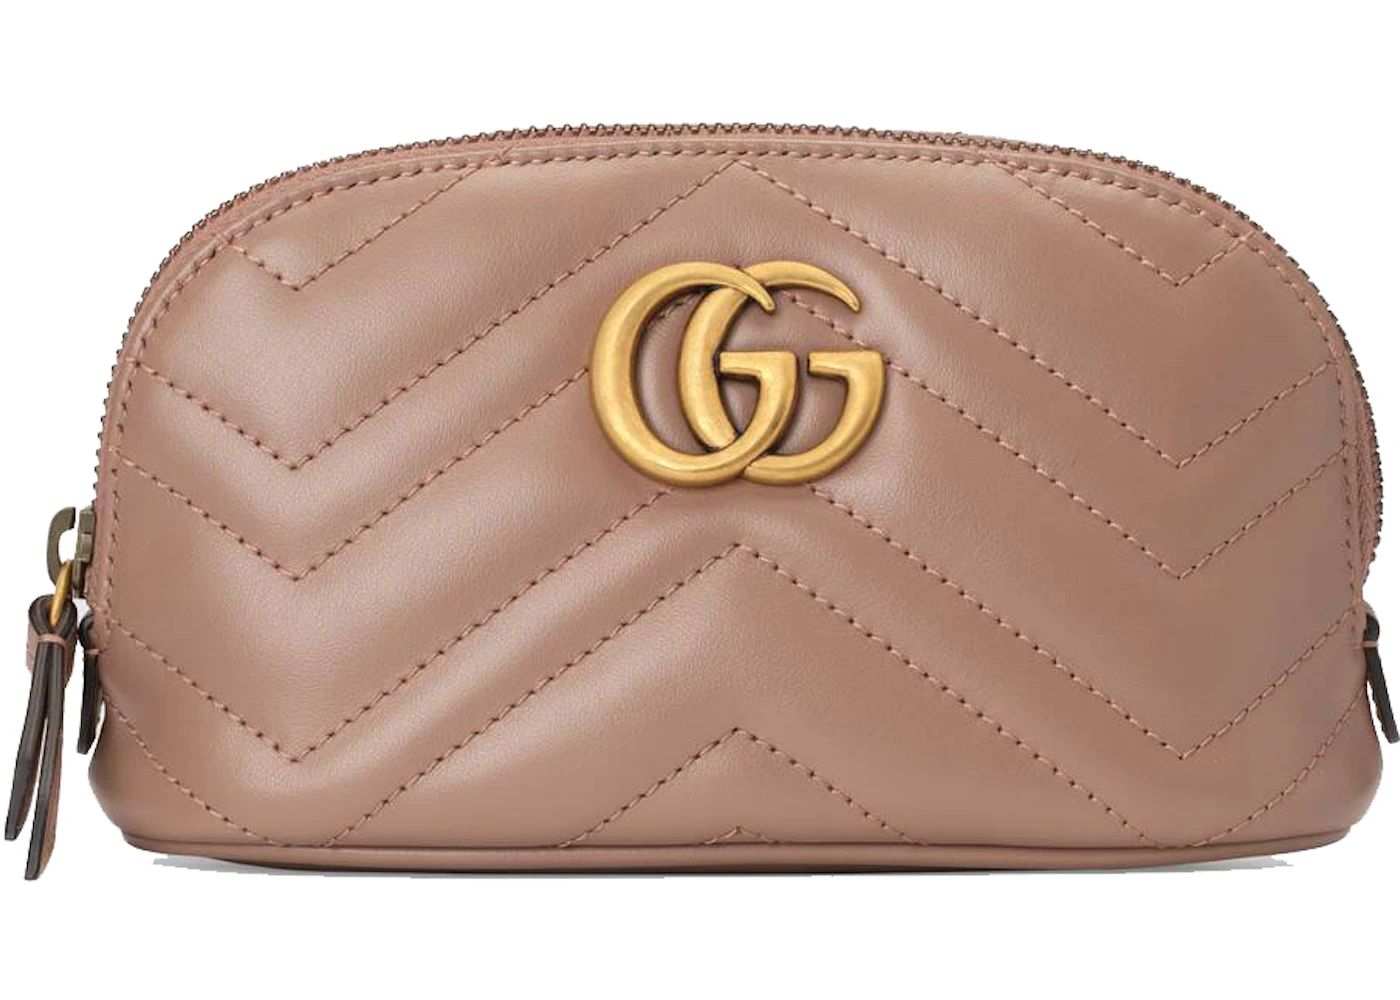 Sold. Gucci cosmetic pink pouch